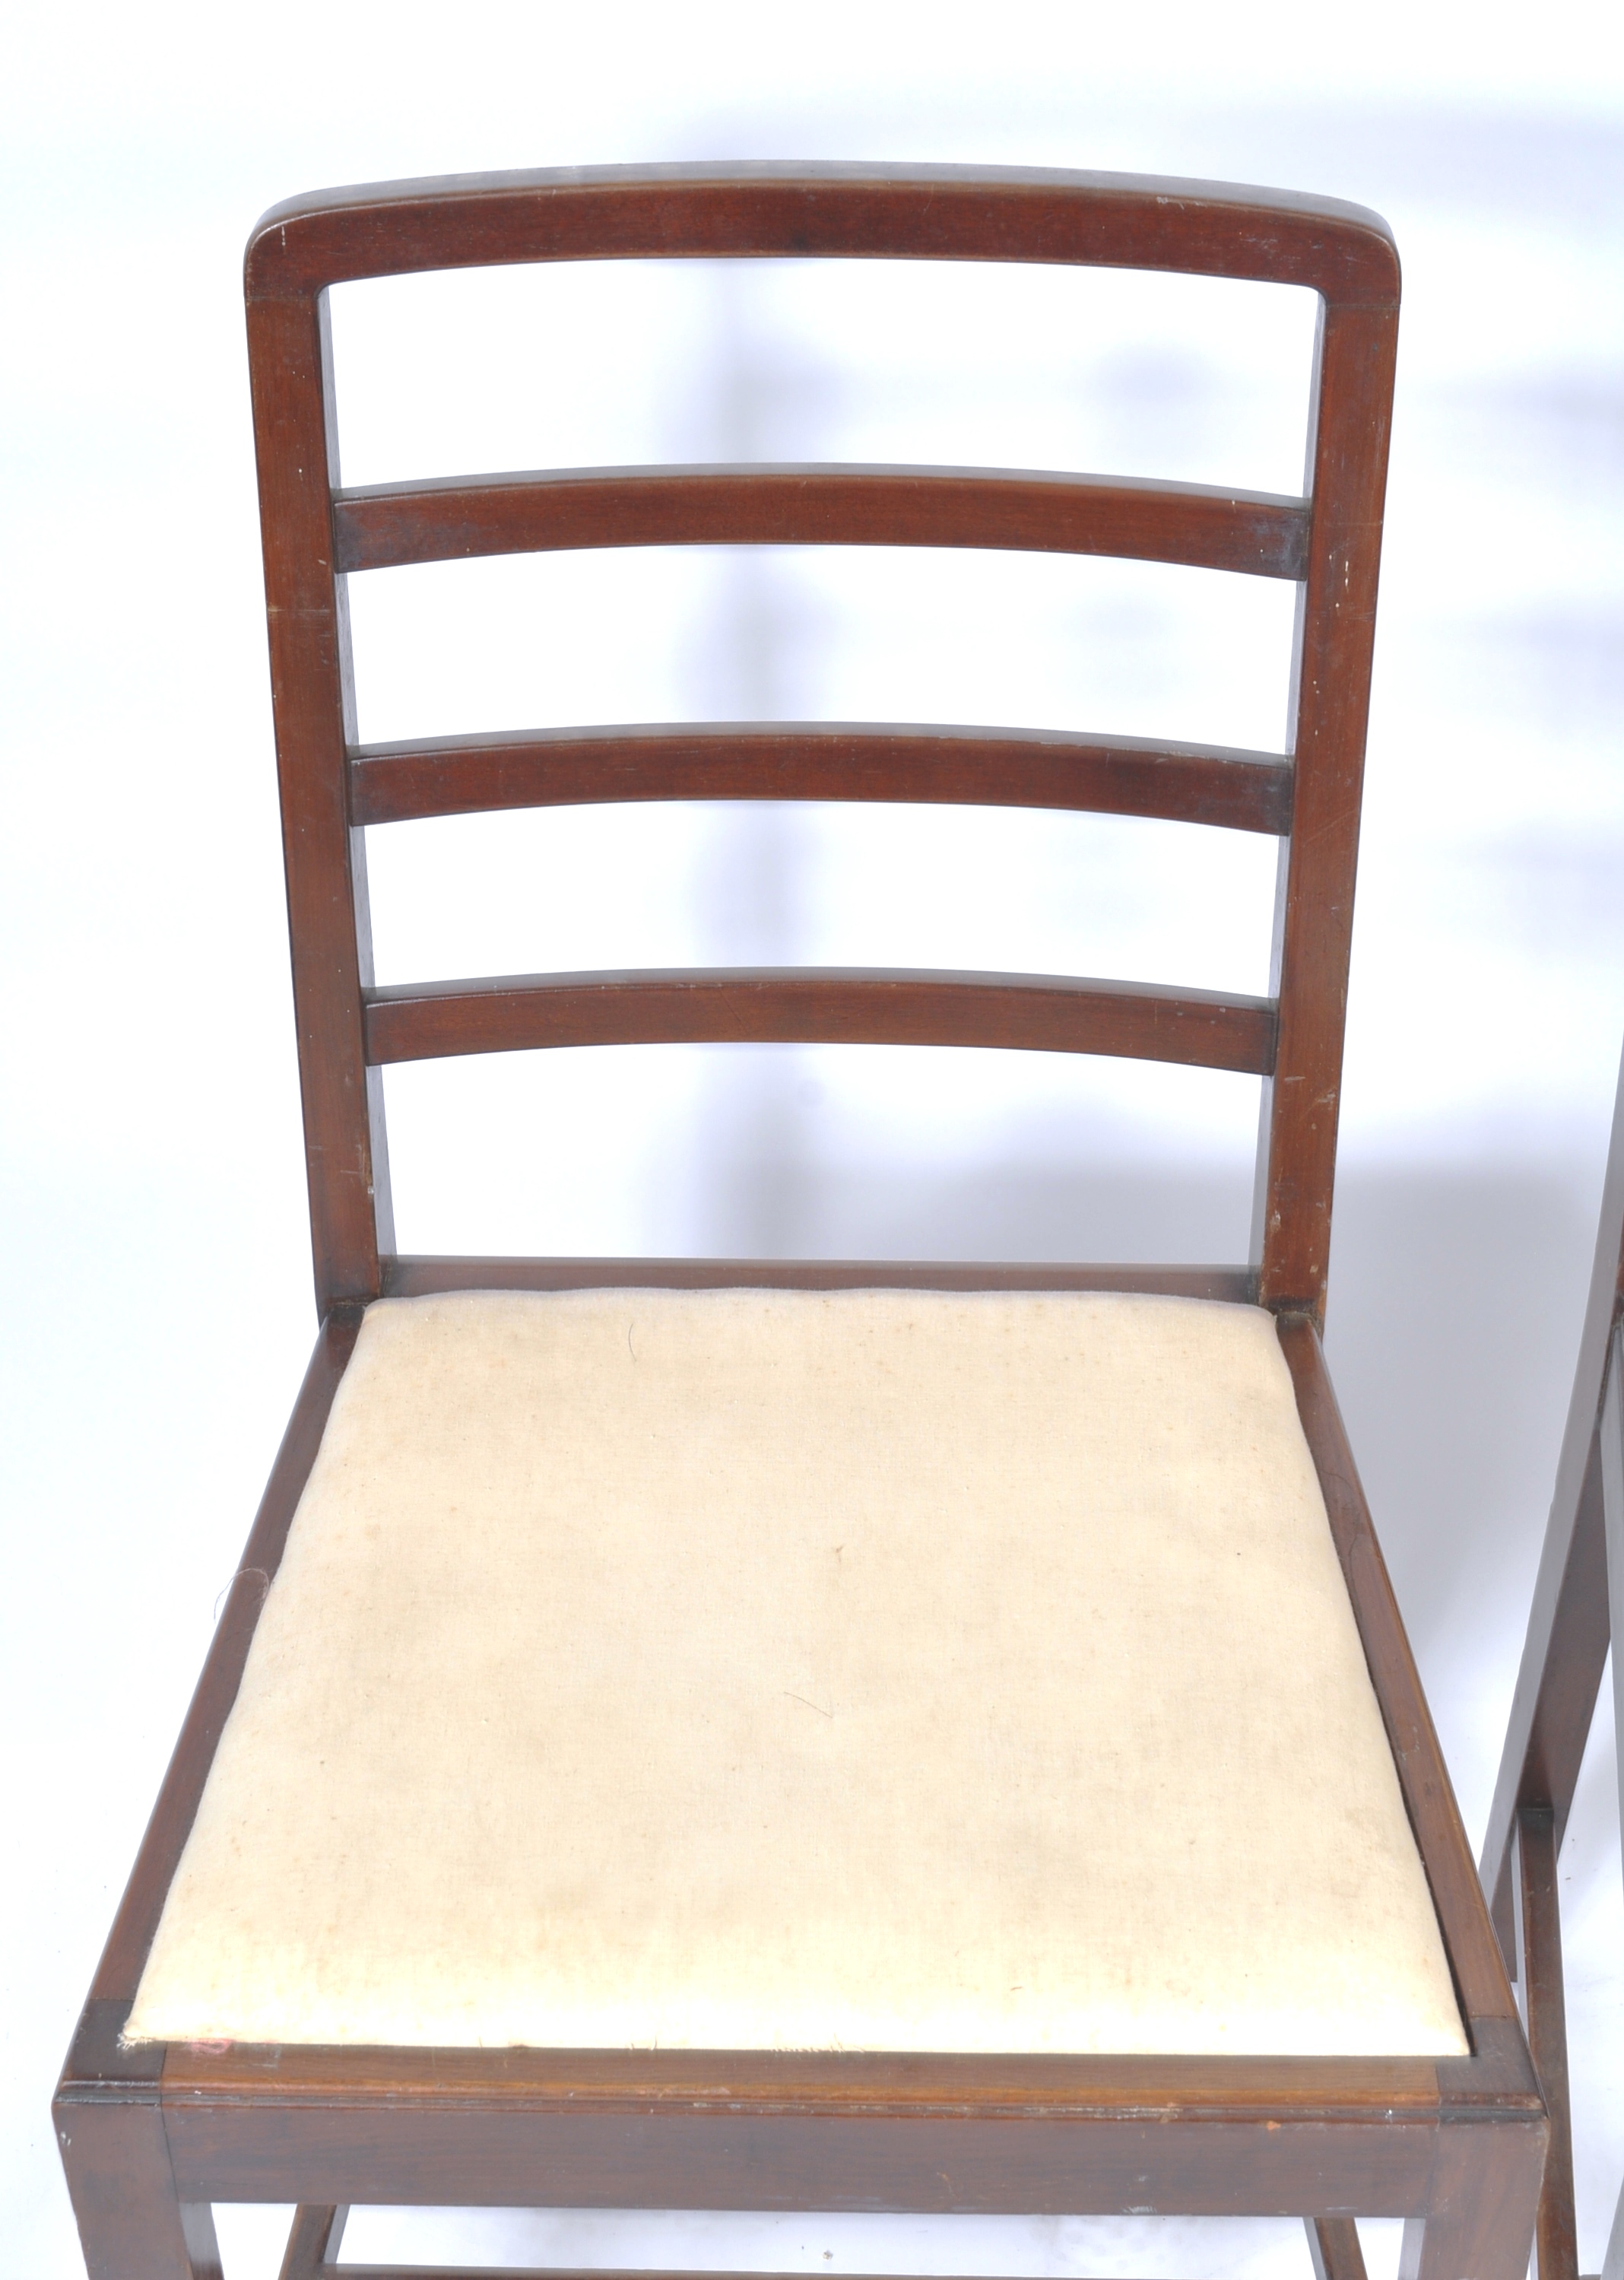 HEALS OF LONDON ORIGINAL SET OF DINING CHAIRS - Image 5 of 7